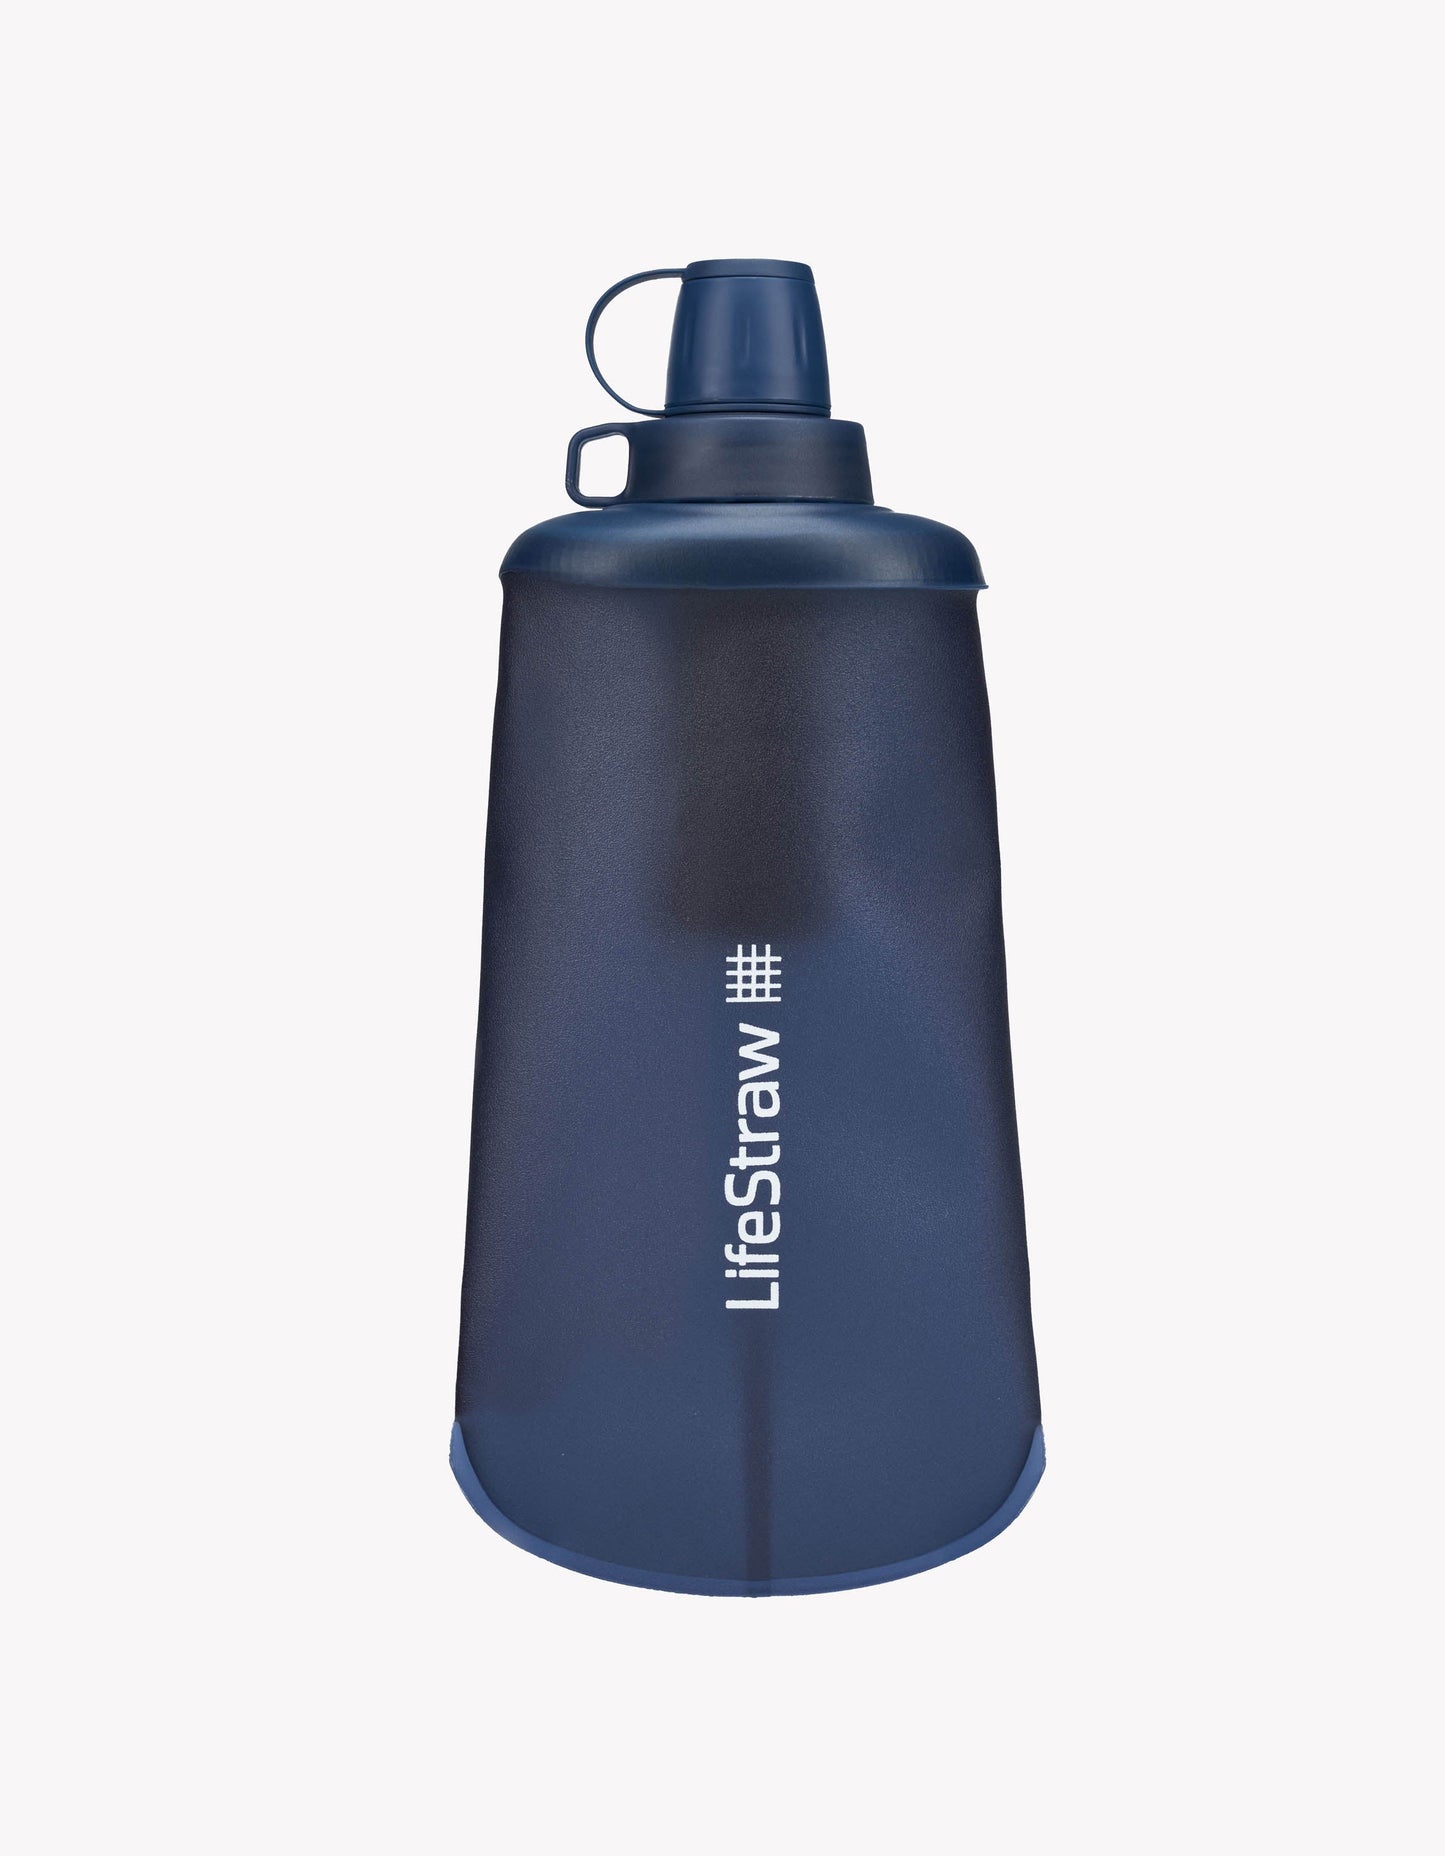 LifeStraw Peak Series Collapsible Squeeze Bottle